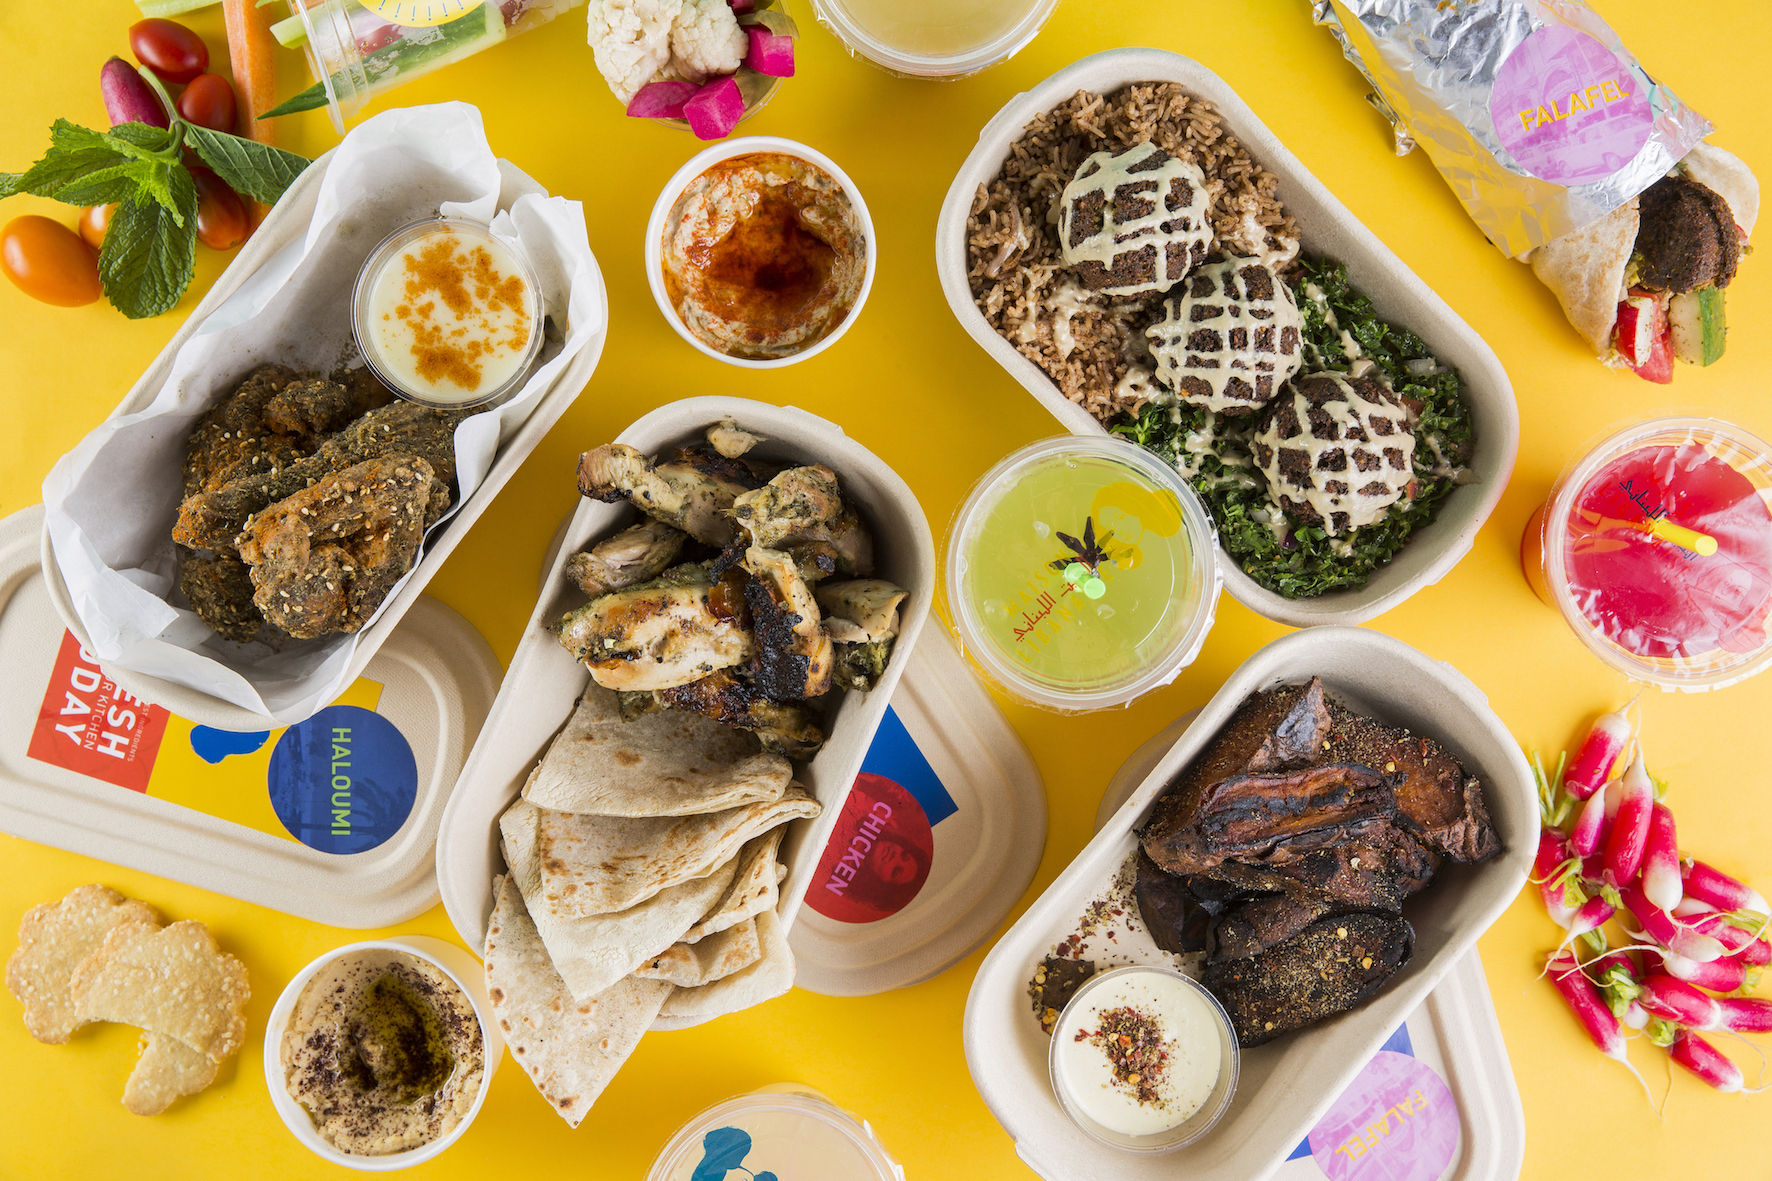 Where to find the best Middle Eastern eats in Hong Kong